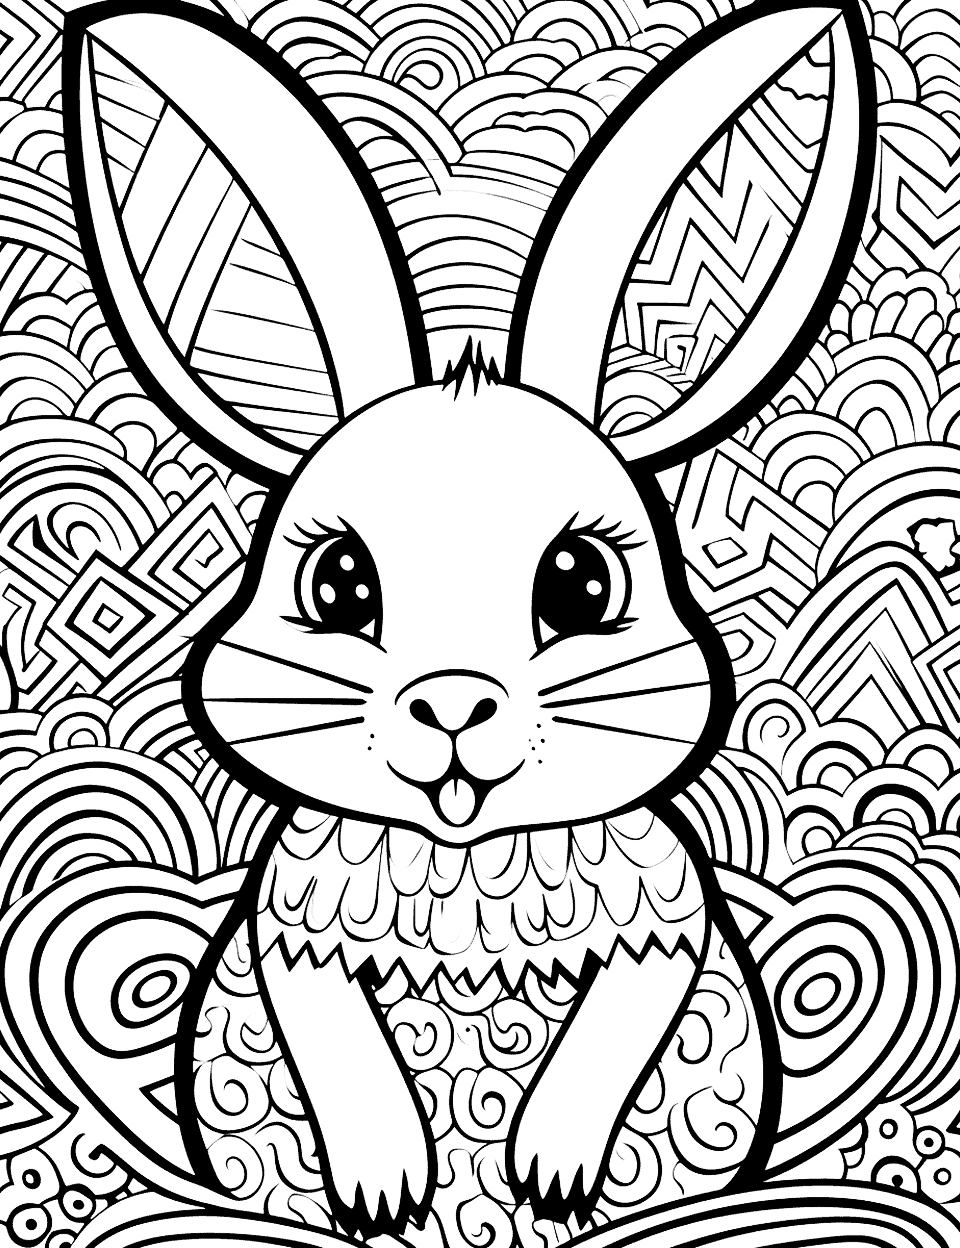 Bunny in Zentangle Wonderland Coloring Page - Abstract patterns forming a complex maze with a bunny at the center.